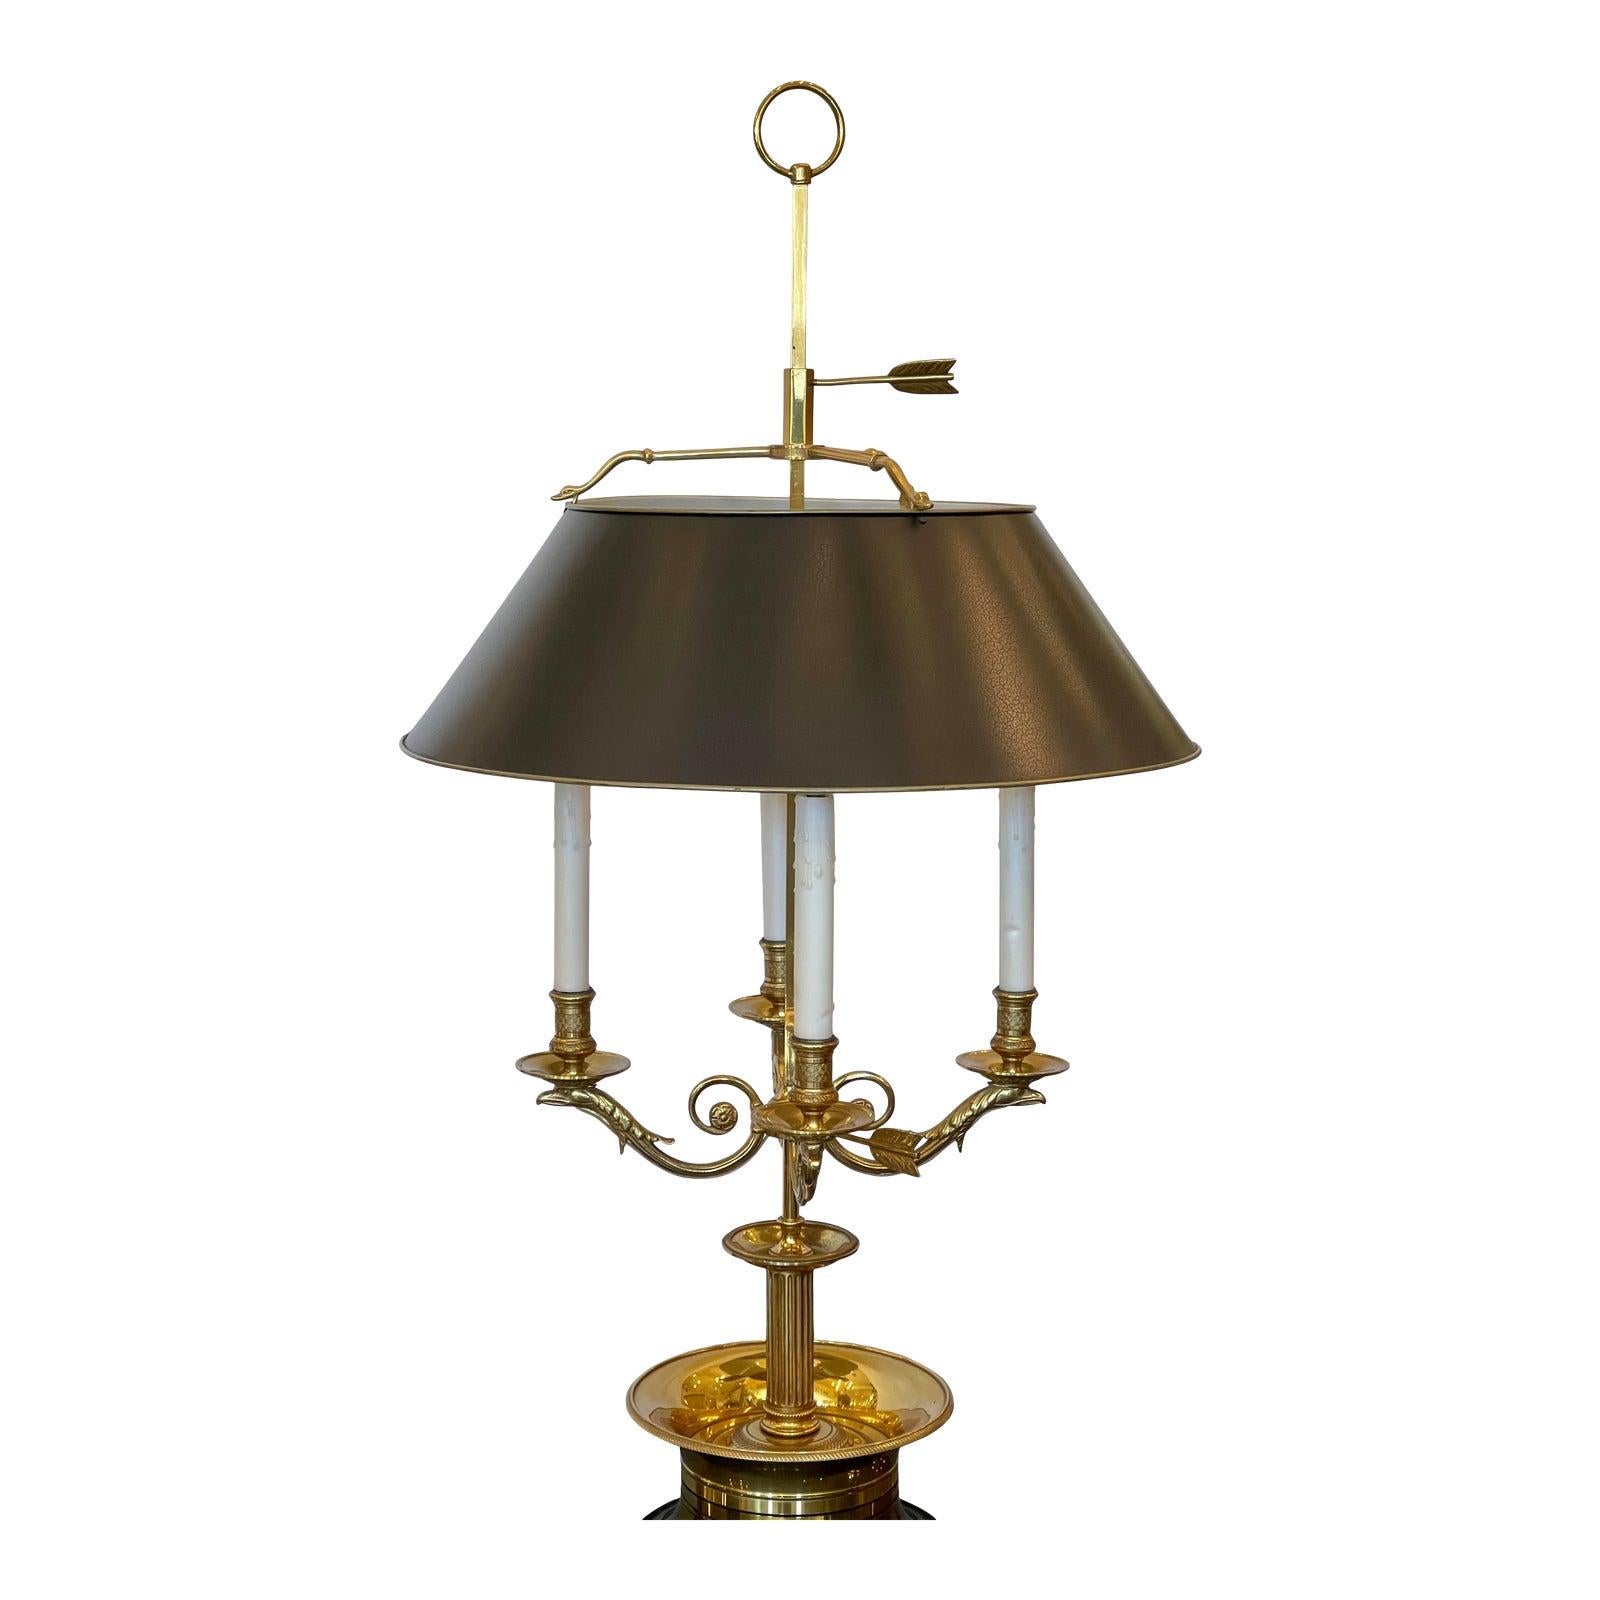 North American Large Paul Ferrante French Gilt Bronze Four Light Bouillotte Griffin Table Lamp